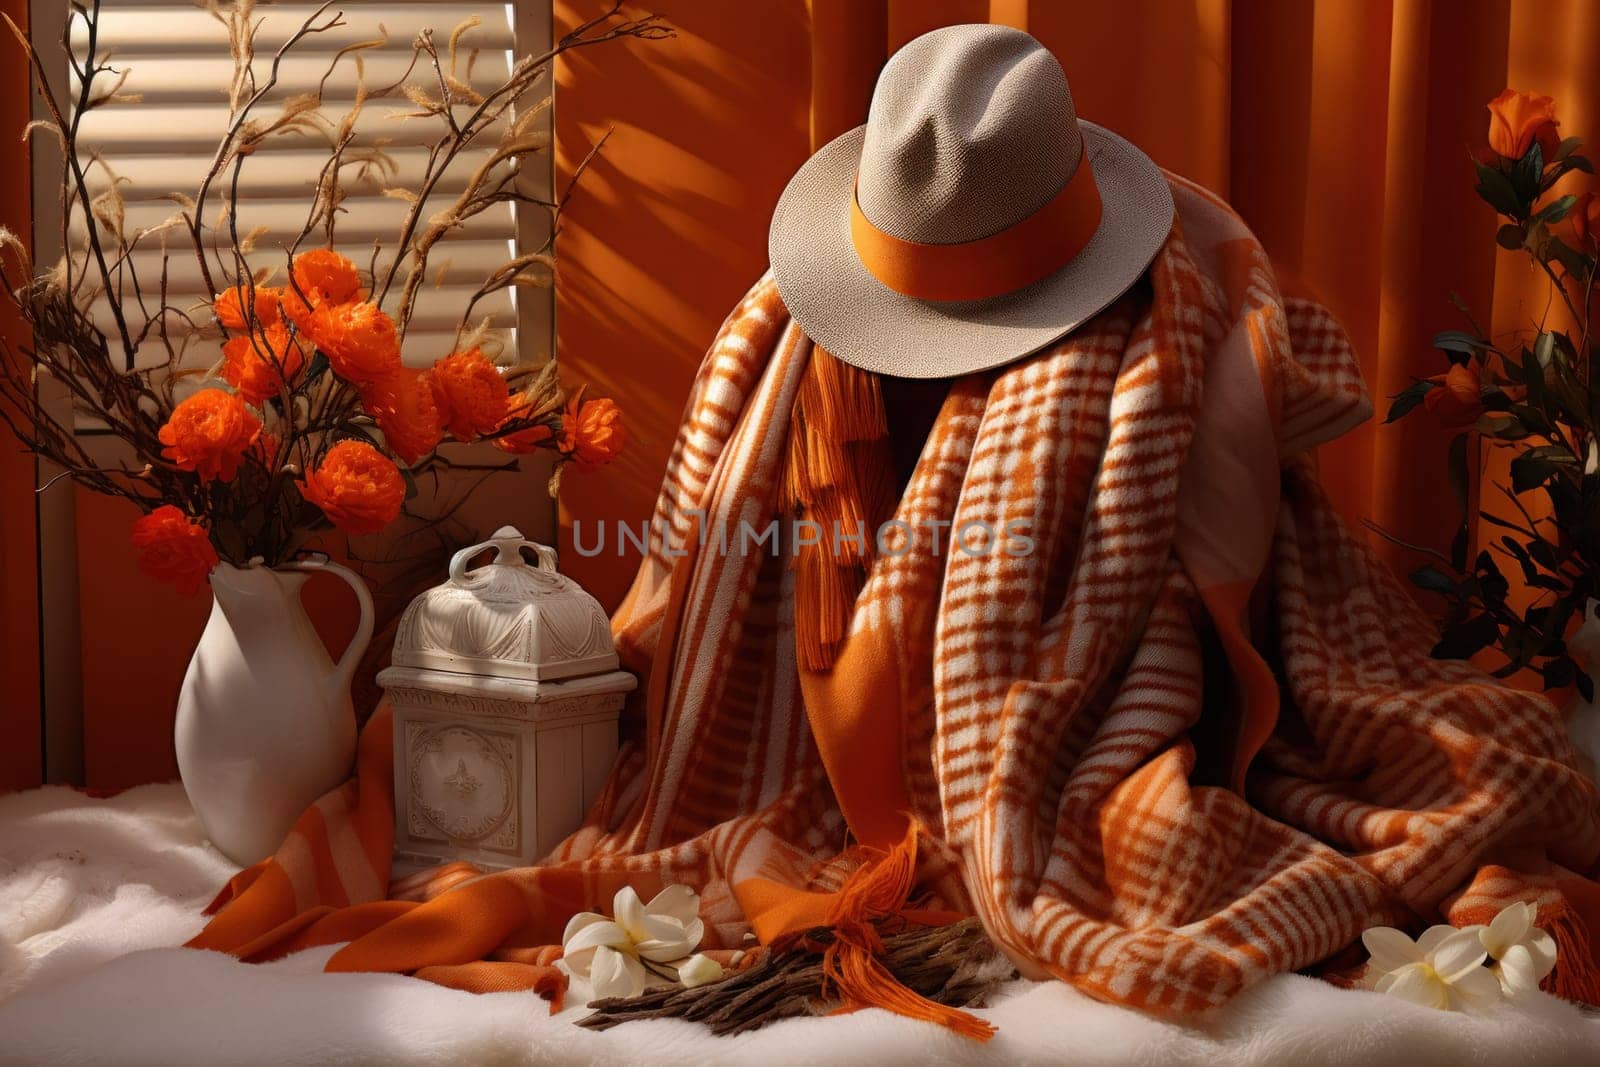 A chic portrayal of the winter season's fashion, highlighting stylish winter attire, including scarves, hats, and coats. This composition captures the elegance and coziness of winter wardrobe.